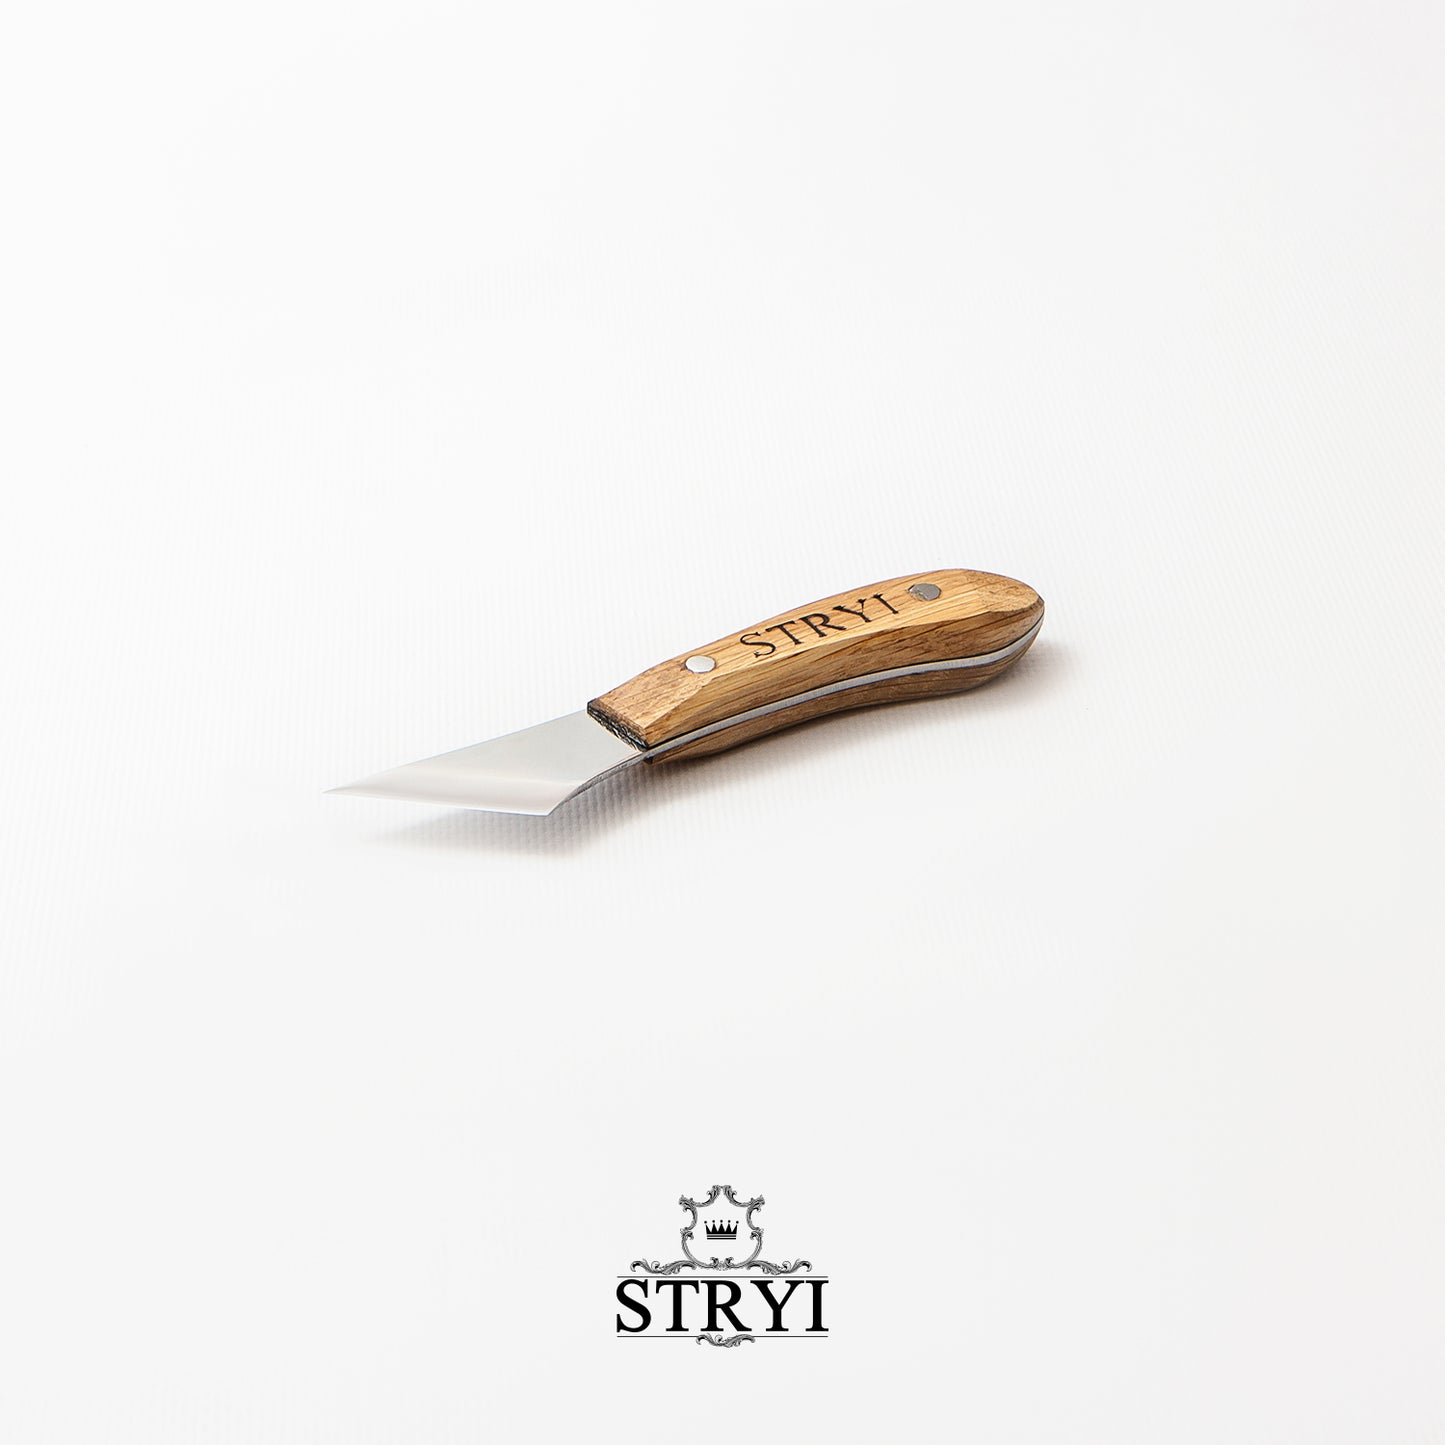 Figured knife for woodcarving 40mm STRYI Profi, whittling knives, sloyd knives, knife for wooden jewelry